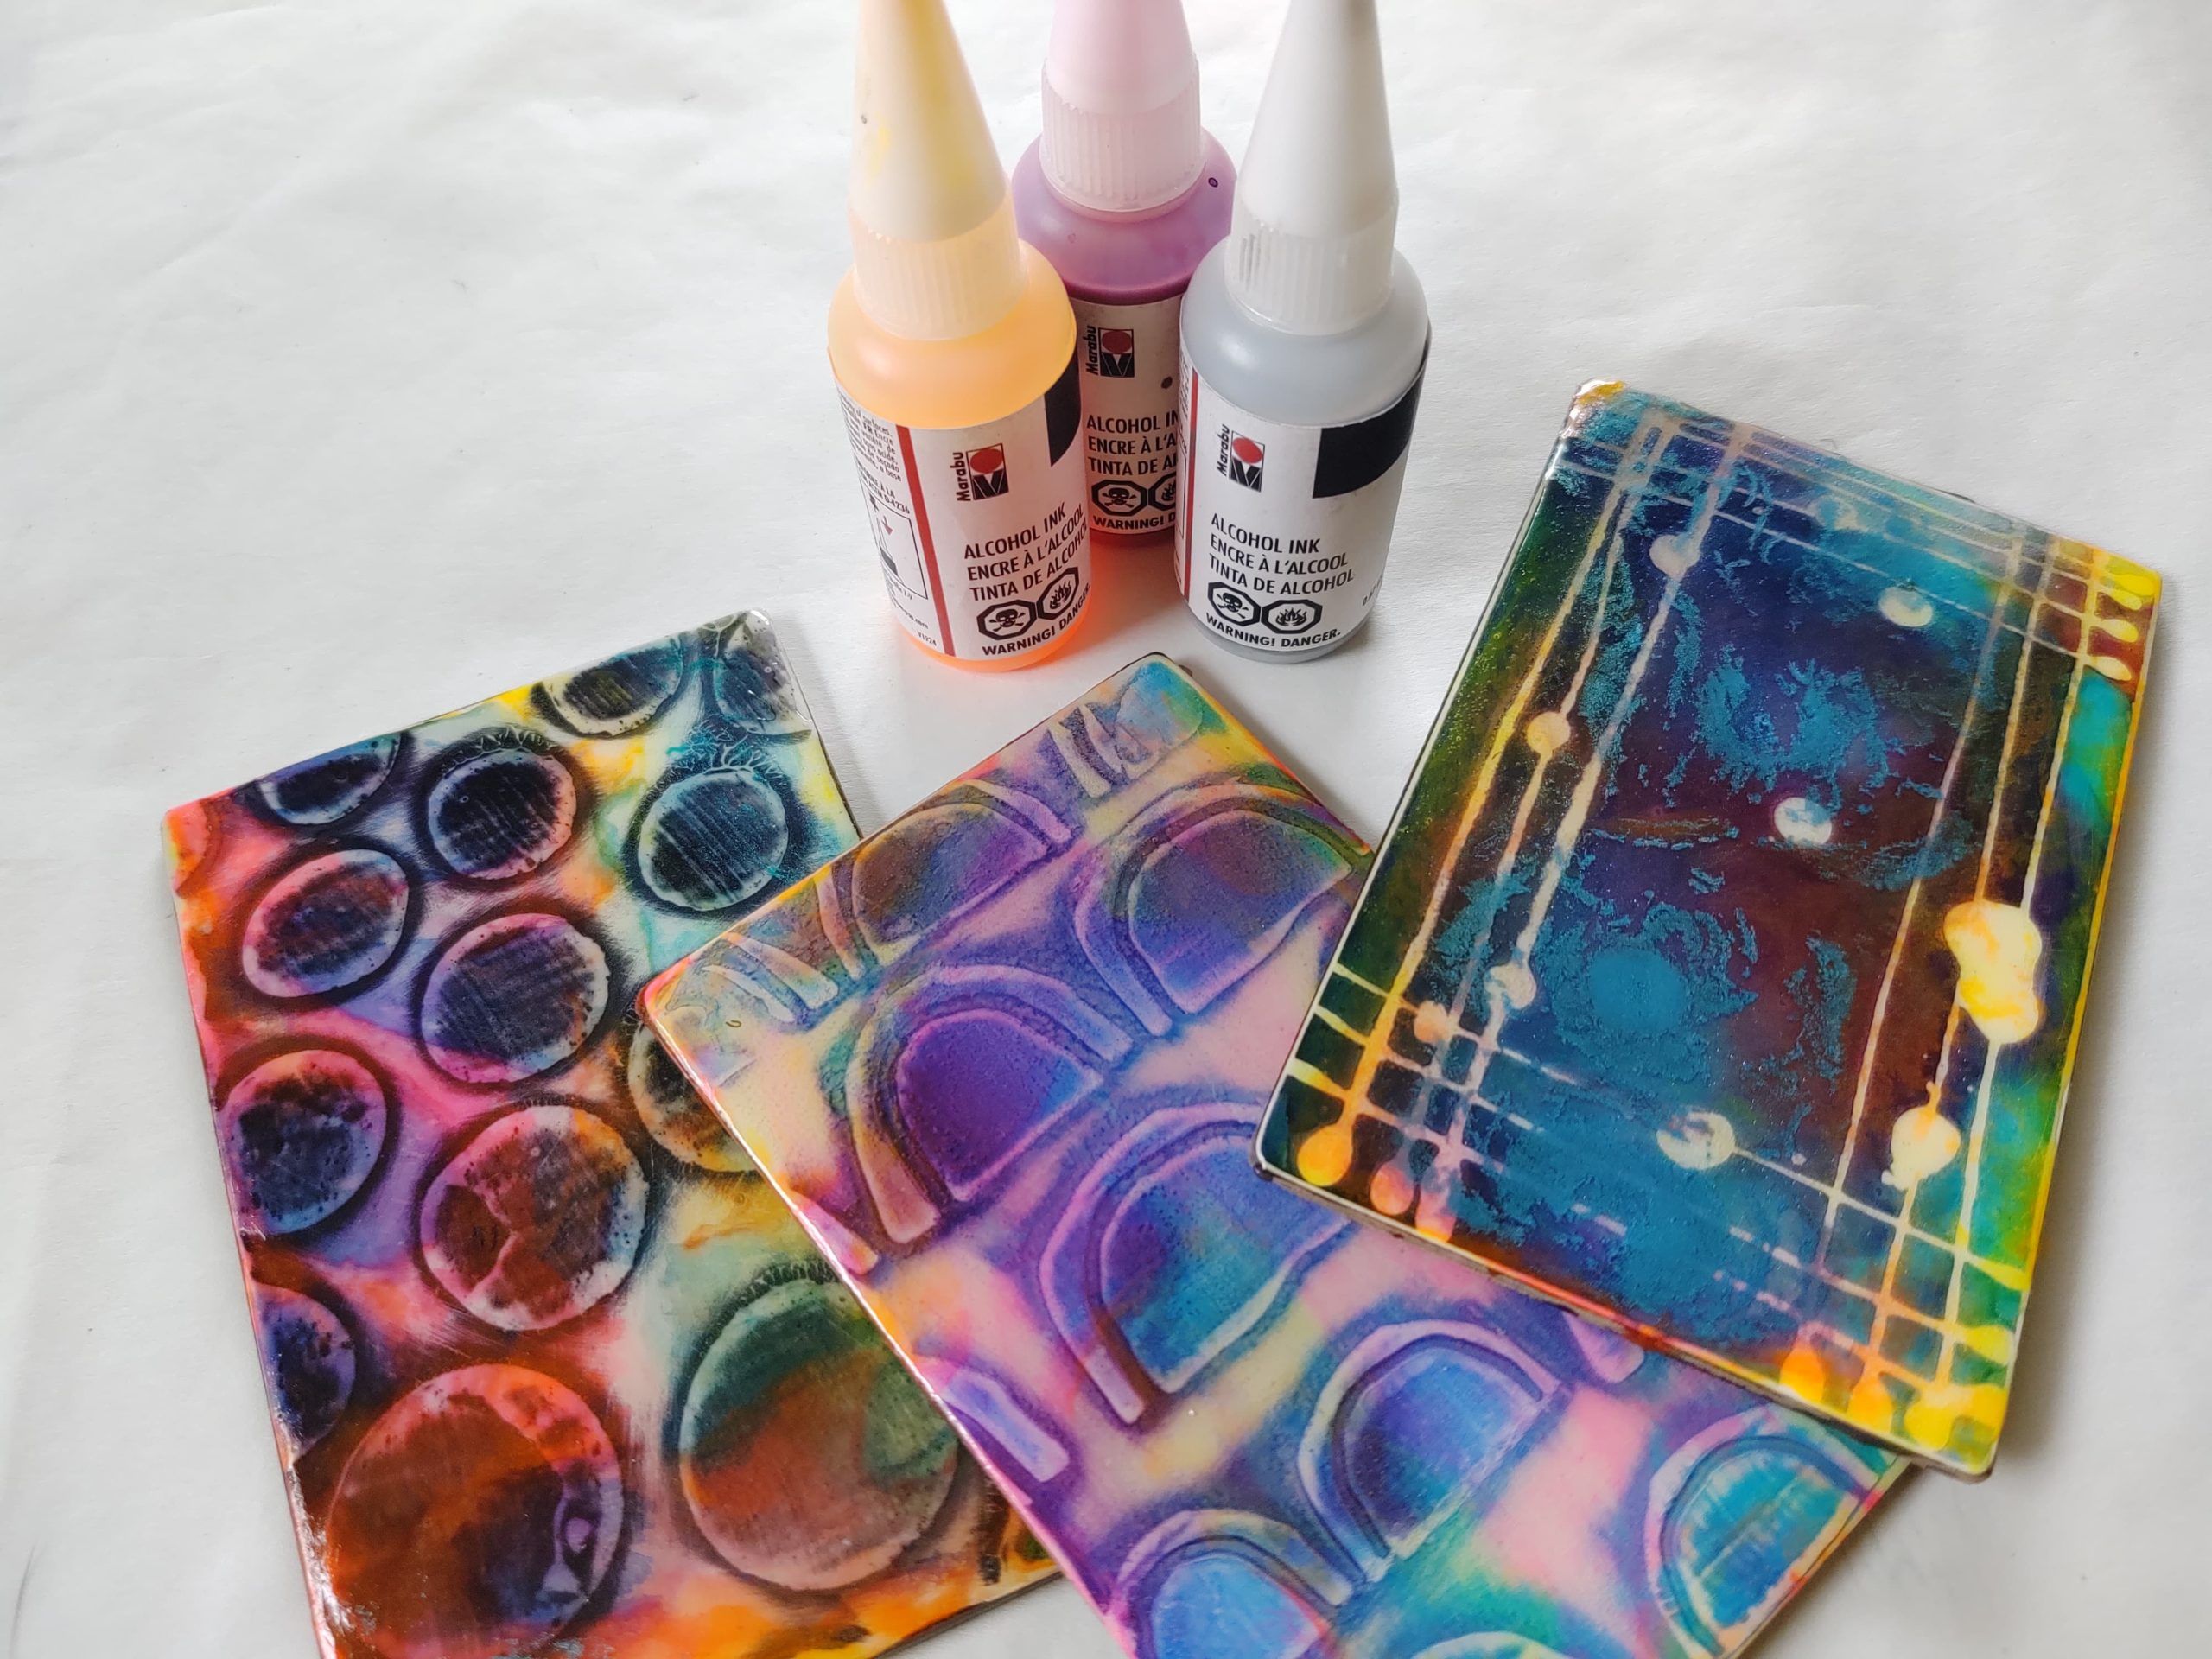 Is Acrylic Ink the Same As Alcohol Ink?